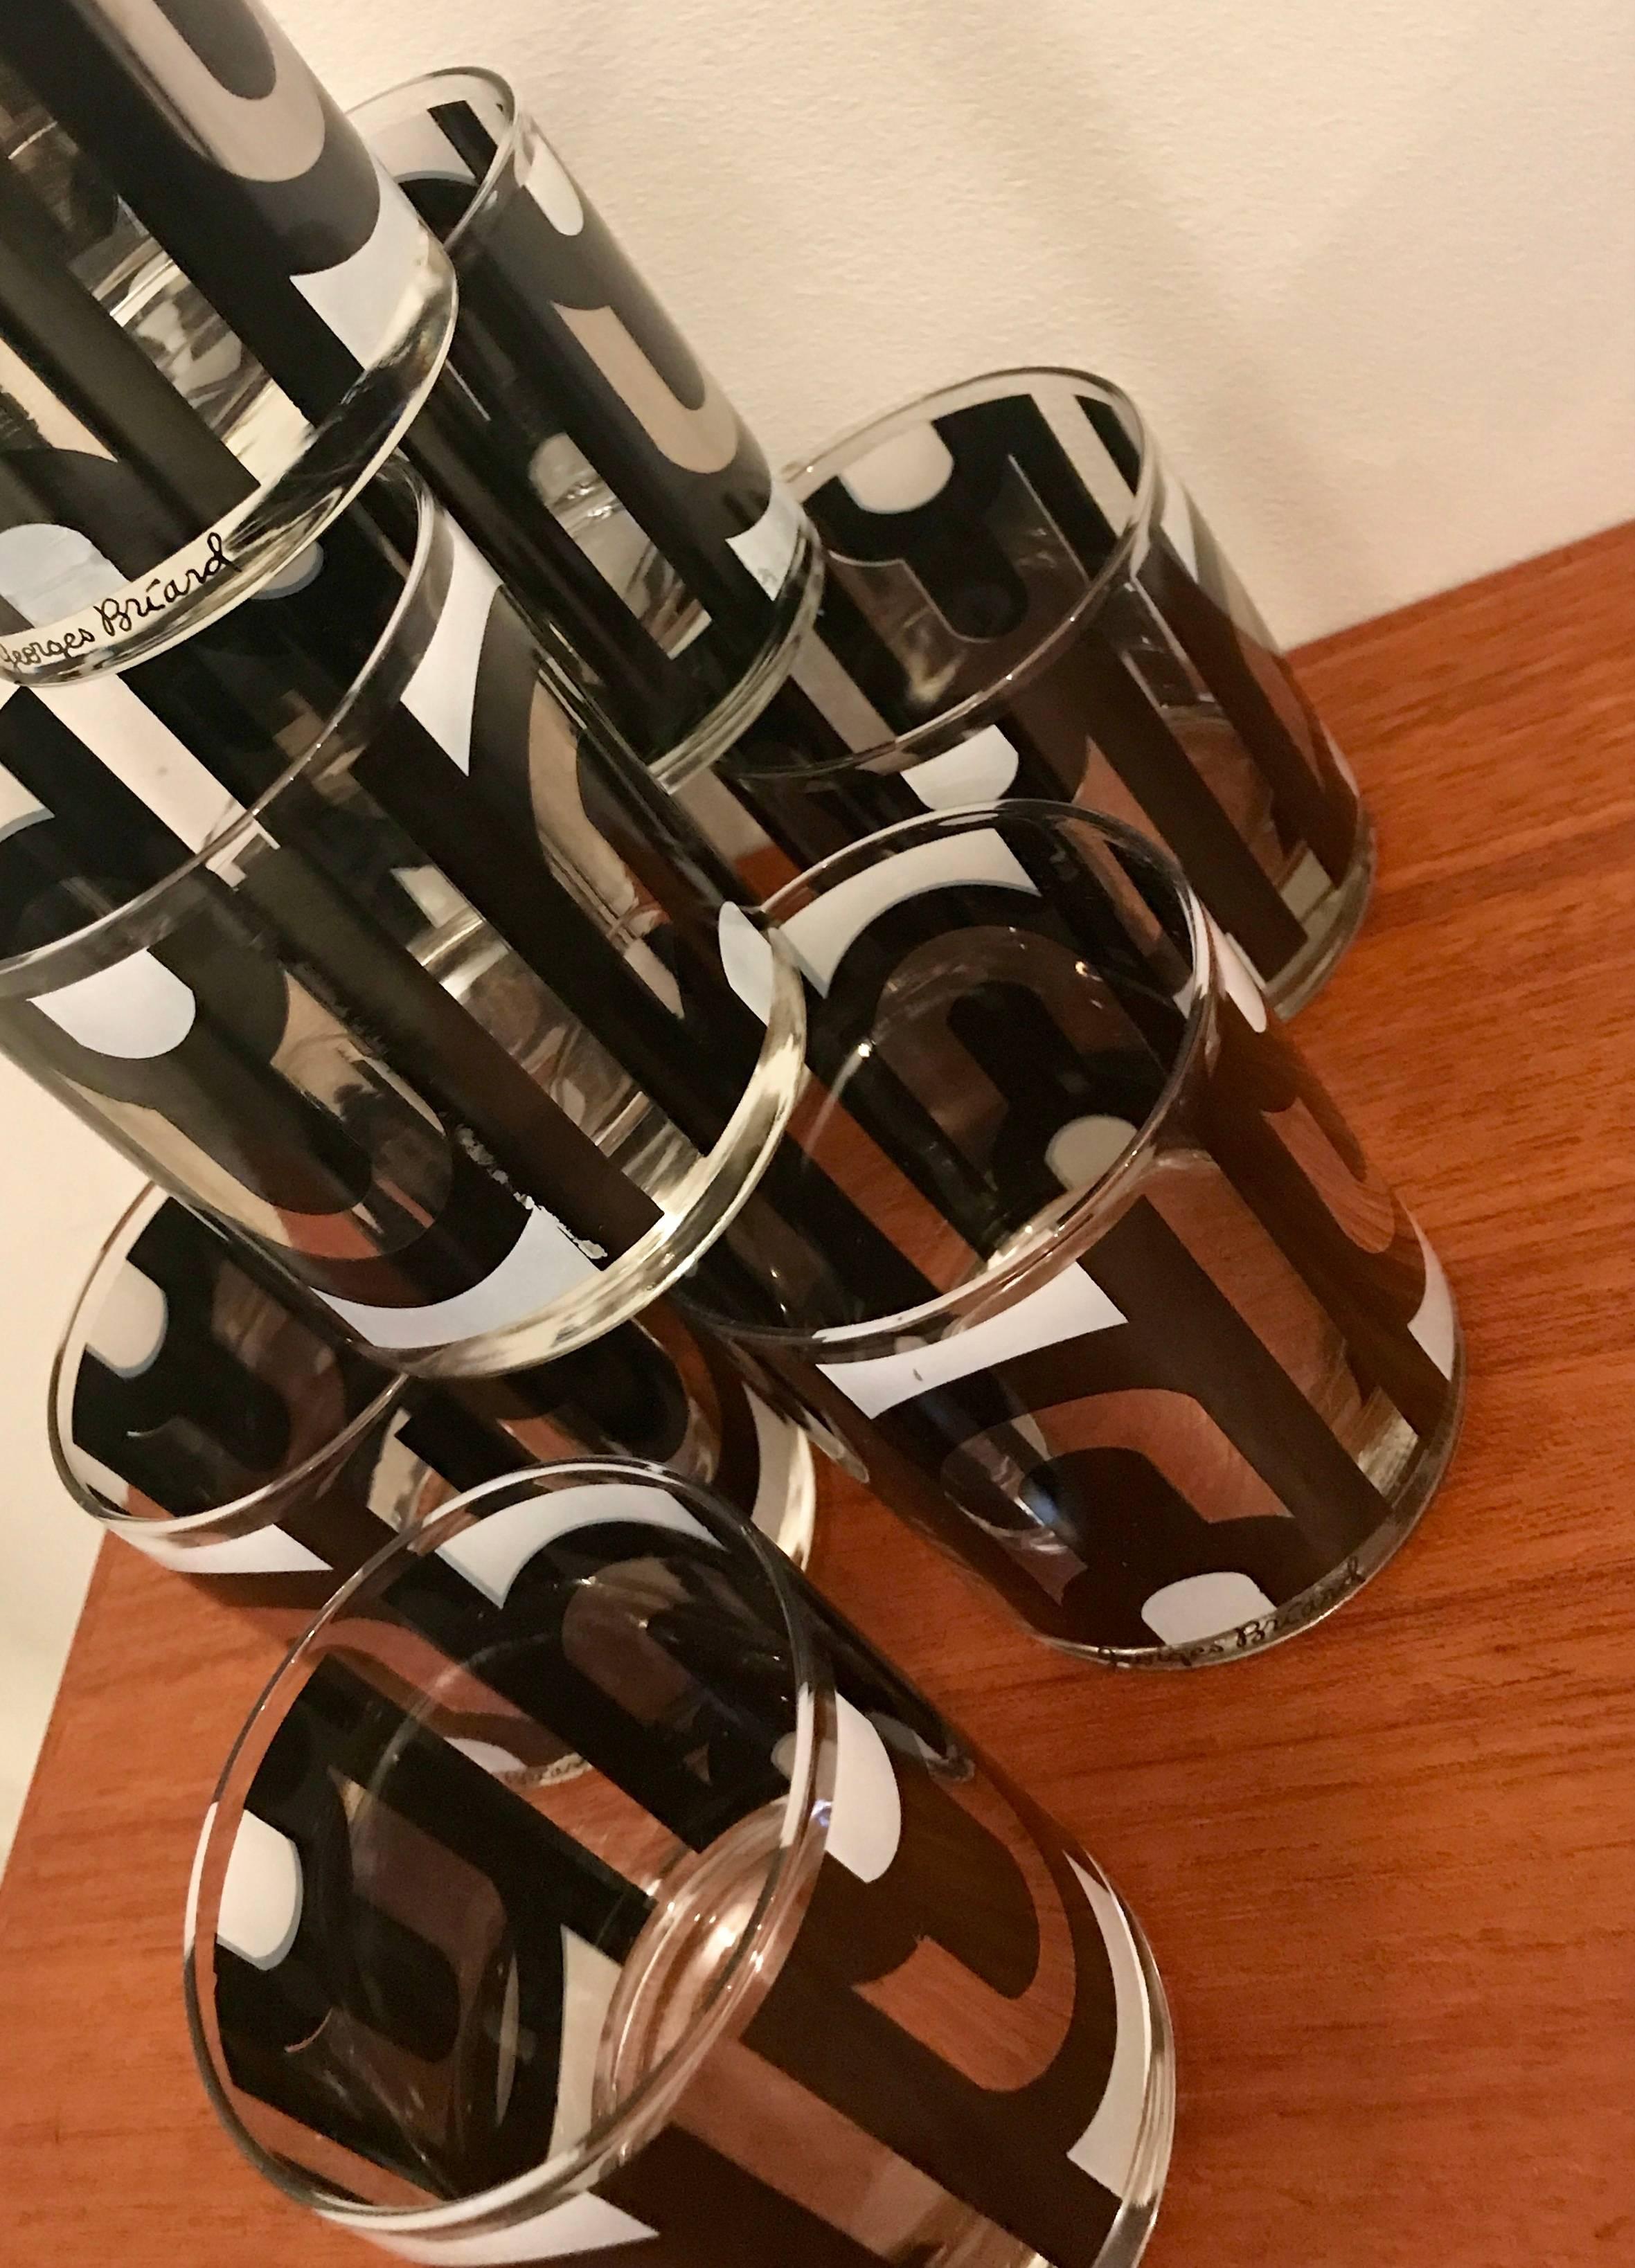 Very chic set of eight cocktail rock glasses by American designer Georges Briard. The pattern is called Metric Maroon Executive, a clean curved design consisting of black, white and silver metallic.